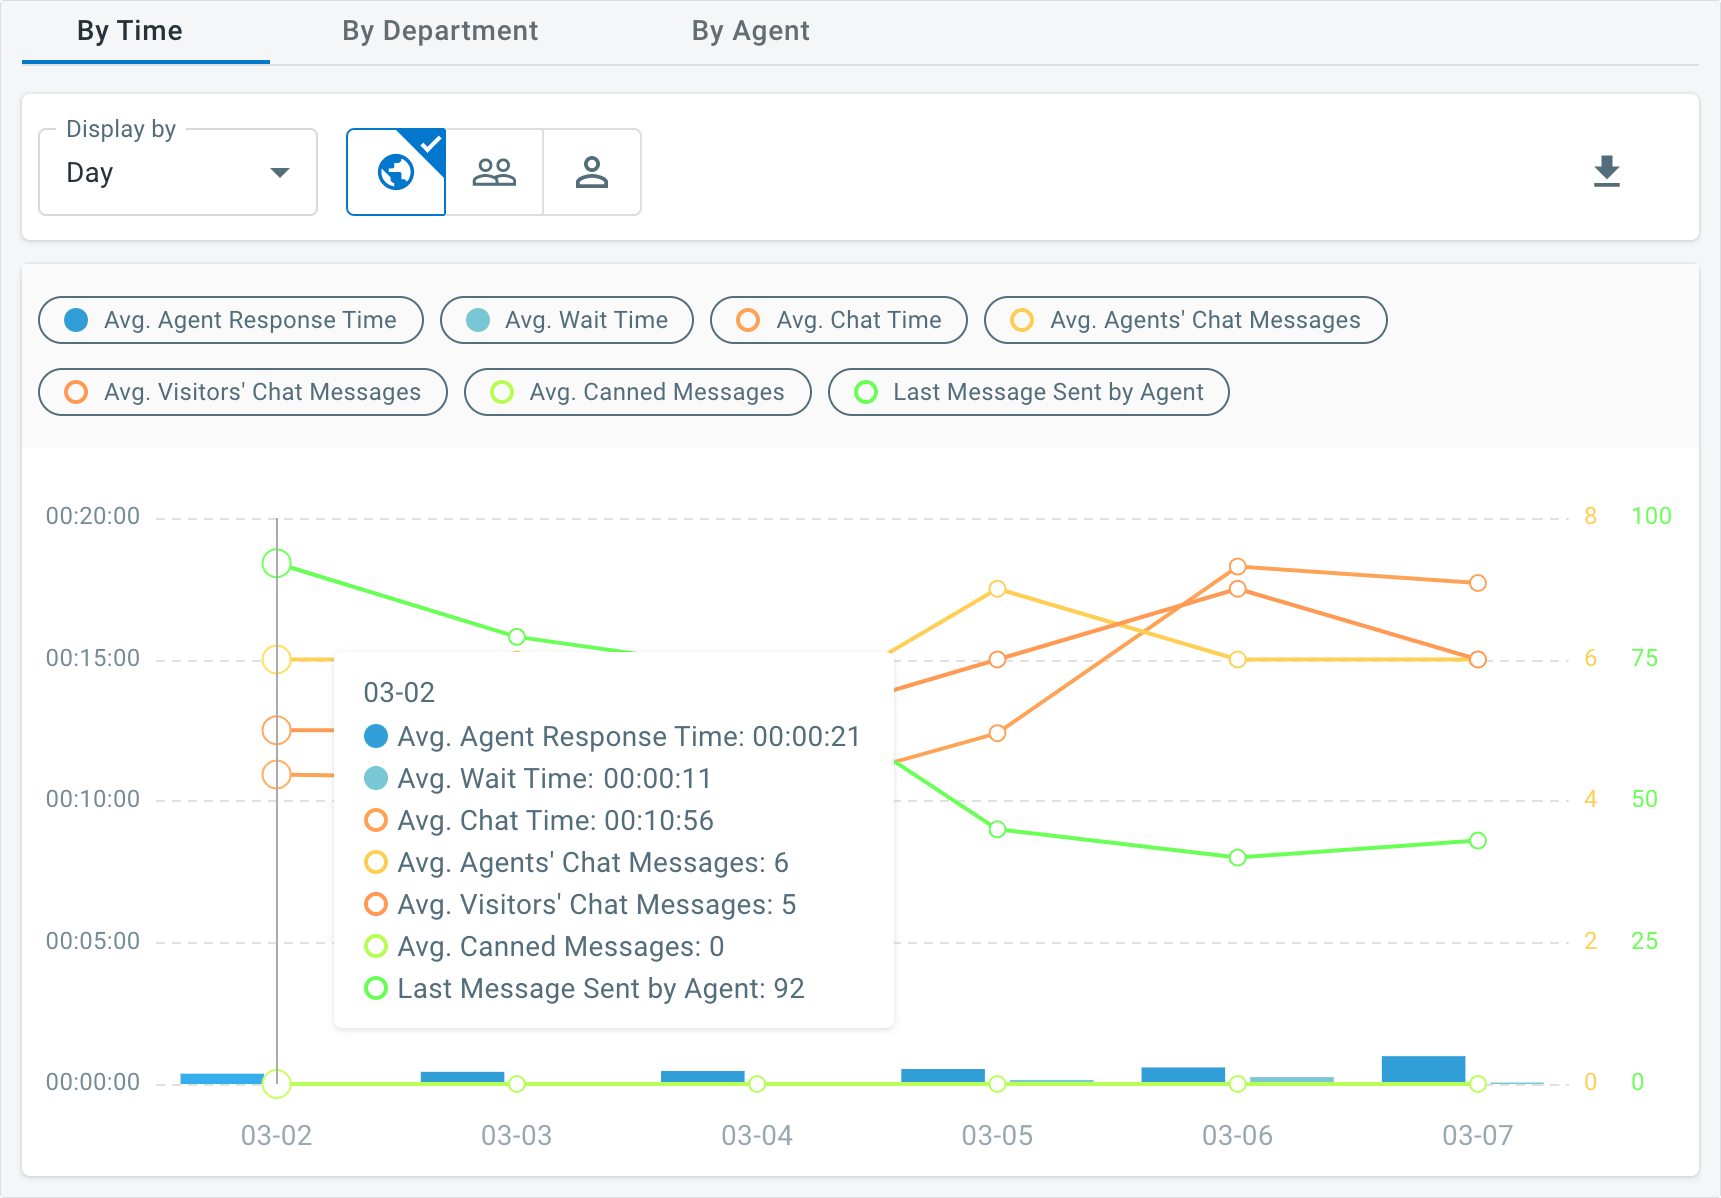 you can track the efficiency of the live chat team via comm100 reports